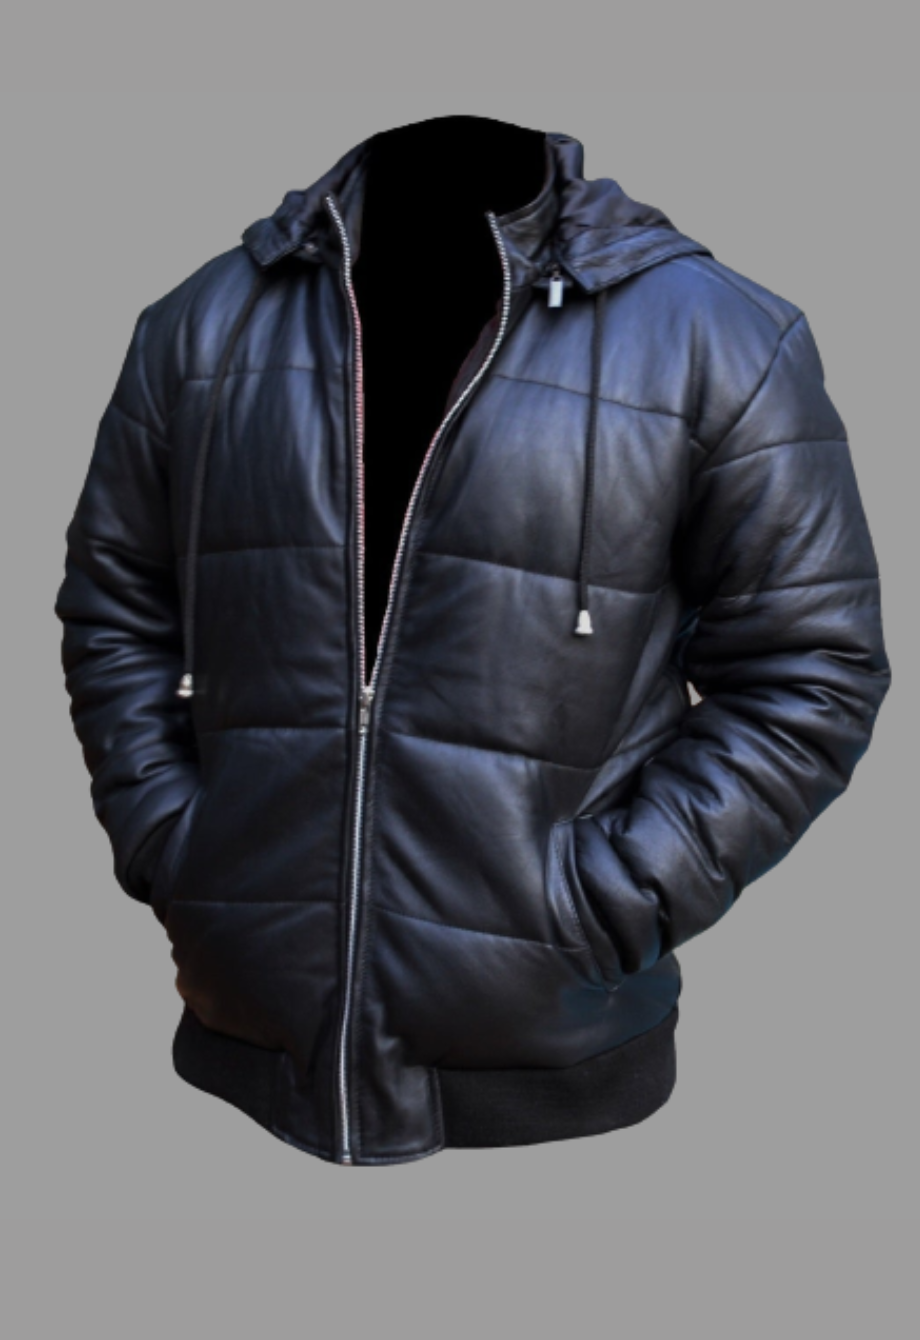 Puffer Removable Hoodie Designer Leather Jacket